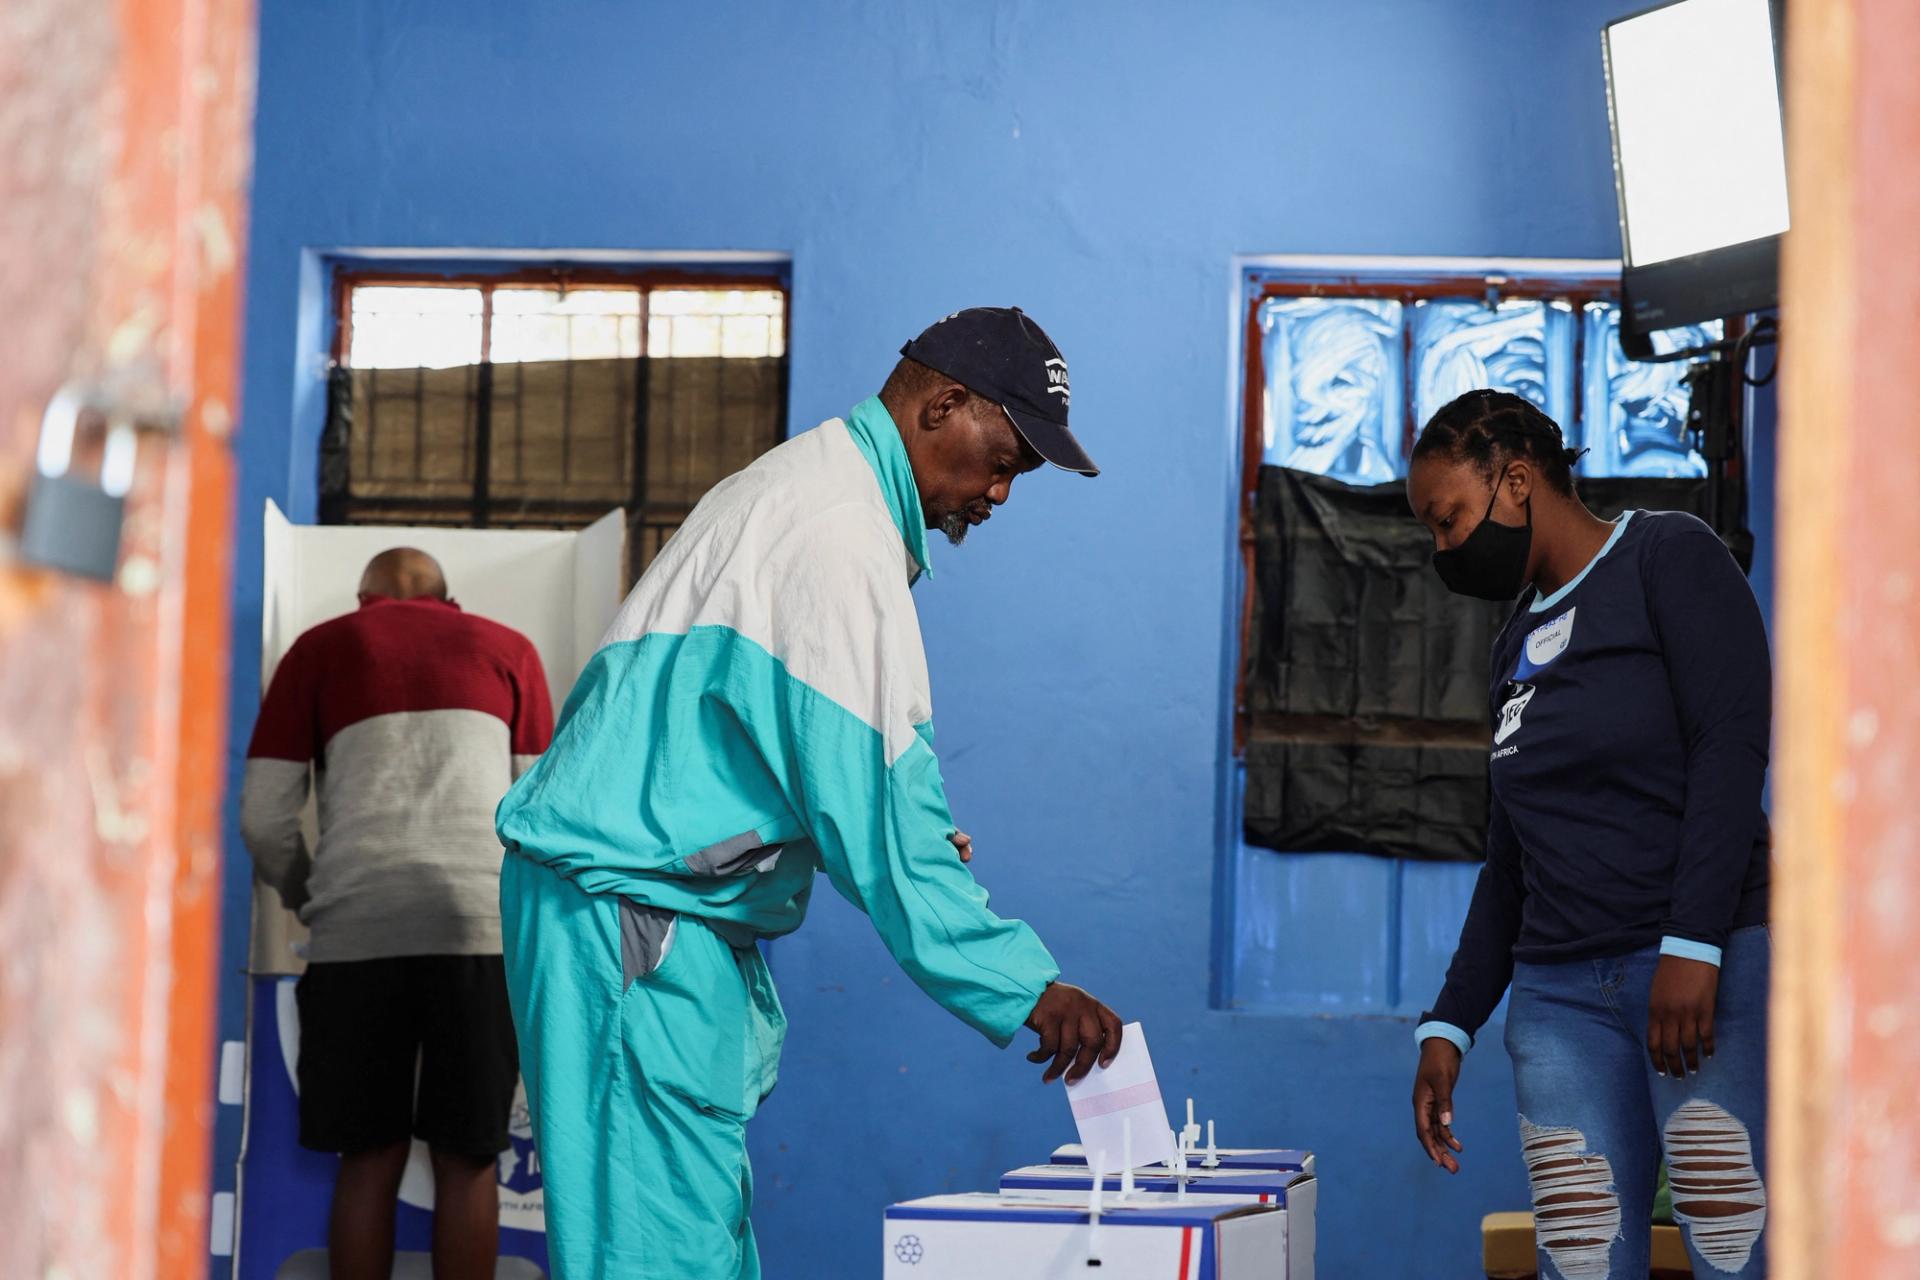 South Africa votes in landmark election that could see ANC lose majority (semafor.com)